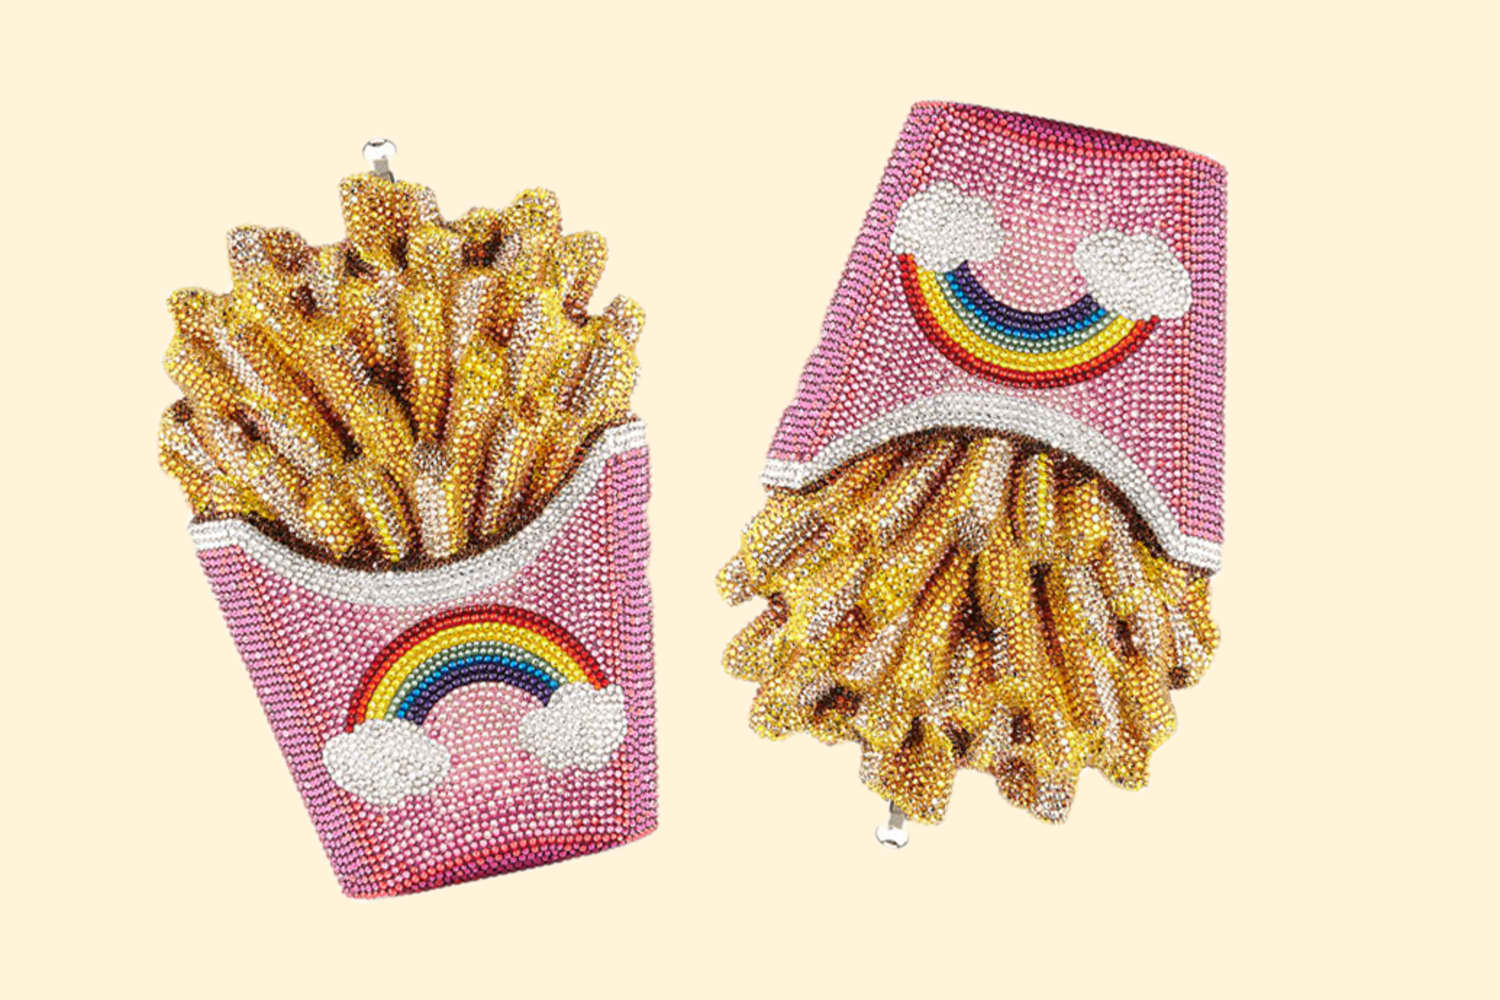  French Fry Purse